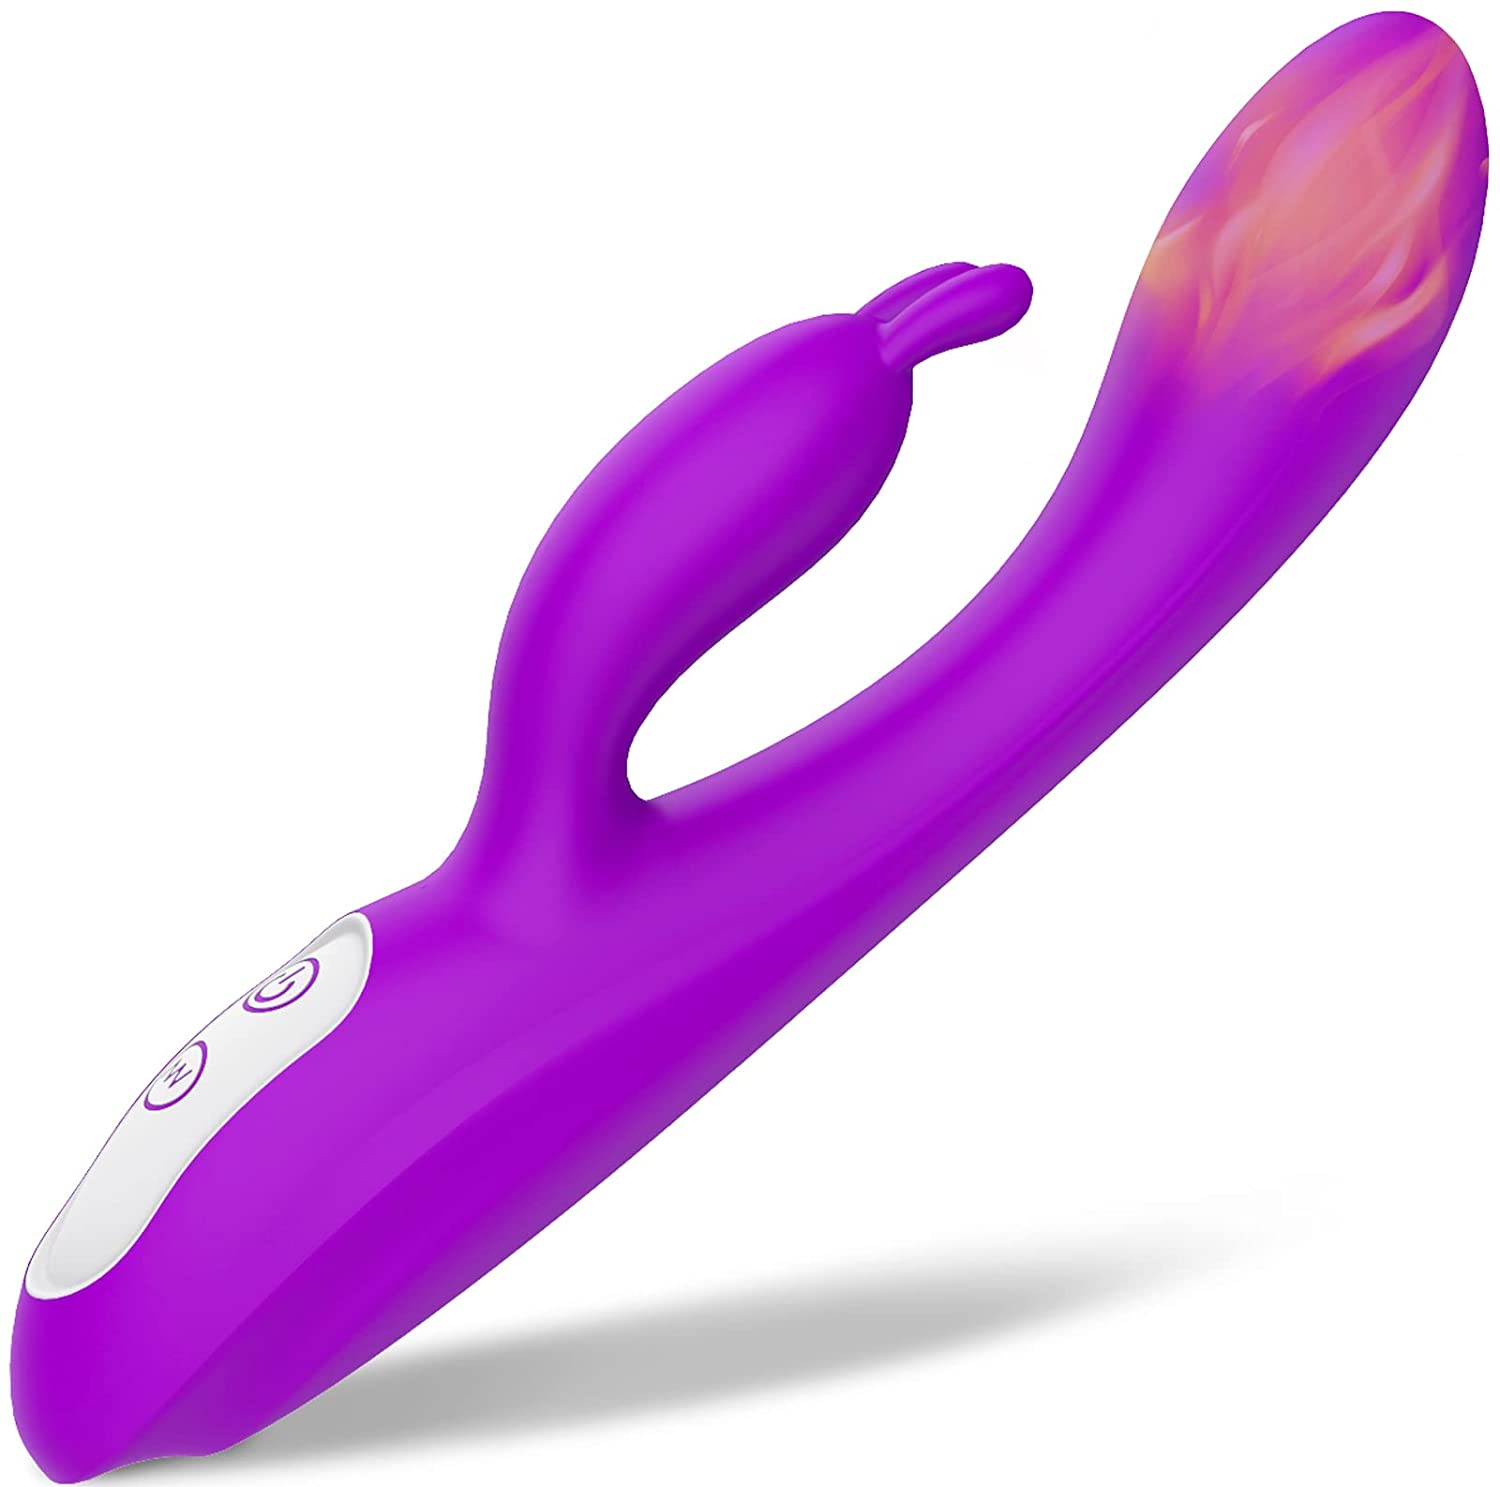 PHANXY G Spot Rabbit Vibrator with Heating Function for Couple - Purple